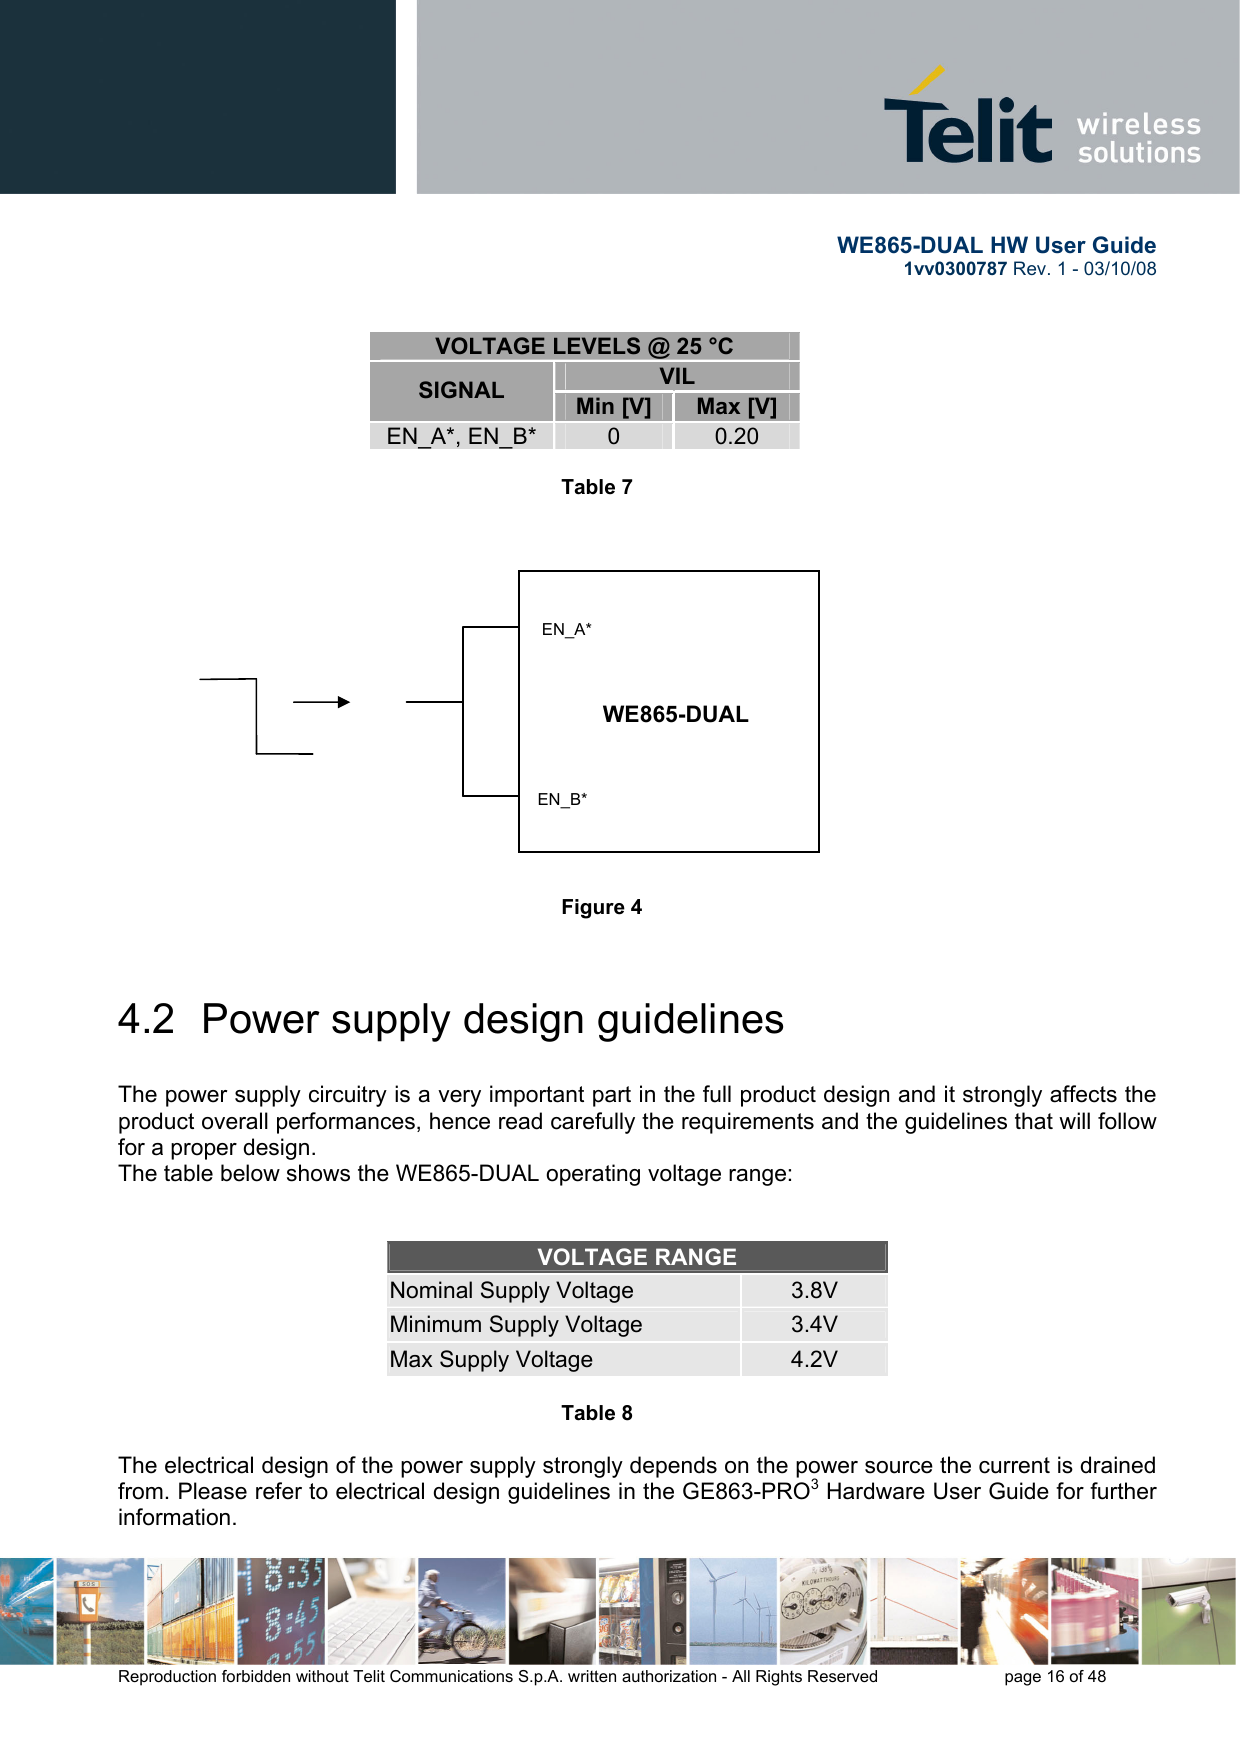       WE865-DUAL HW User Guide 1vv0300787 Rev. 1 - 03/10/08      Reproduction forbidden without Telit Communications S.p.A. written authorization - All Rights Reserved    page 16 of 48  VOLTAGE LEVELS @ 25 °C VIL SIGNAL  Min [V]  Max [V] EN_A*, EN_B*  0  0.20  Table 7                              Figure 4    4.2  Power supply design guidelines  The power supply circuitry is a very important part in the full product design and it strongly affects the product overall performances, hence read carefully the requirements and the guidelines that will follow for a proper design. The table below shows the WE865-DUAL operating voltage range:   VOLTAGE RANGE Nominal Supply Voltage  3.8V Minimum Supply Voltage  3.4V Max Supply Voltage  4.2V  Table 8       The electrical design of the power supply strongly depends on the power source the current is drained from. Please refer to electrical design guidelines in the GE863-PRO3 Hardware User Guide for further information. WE865-DUAL EN_B* EN_A* 